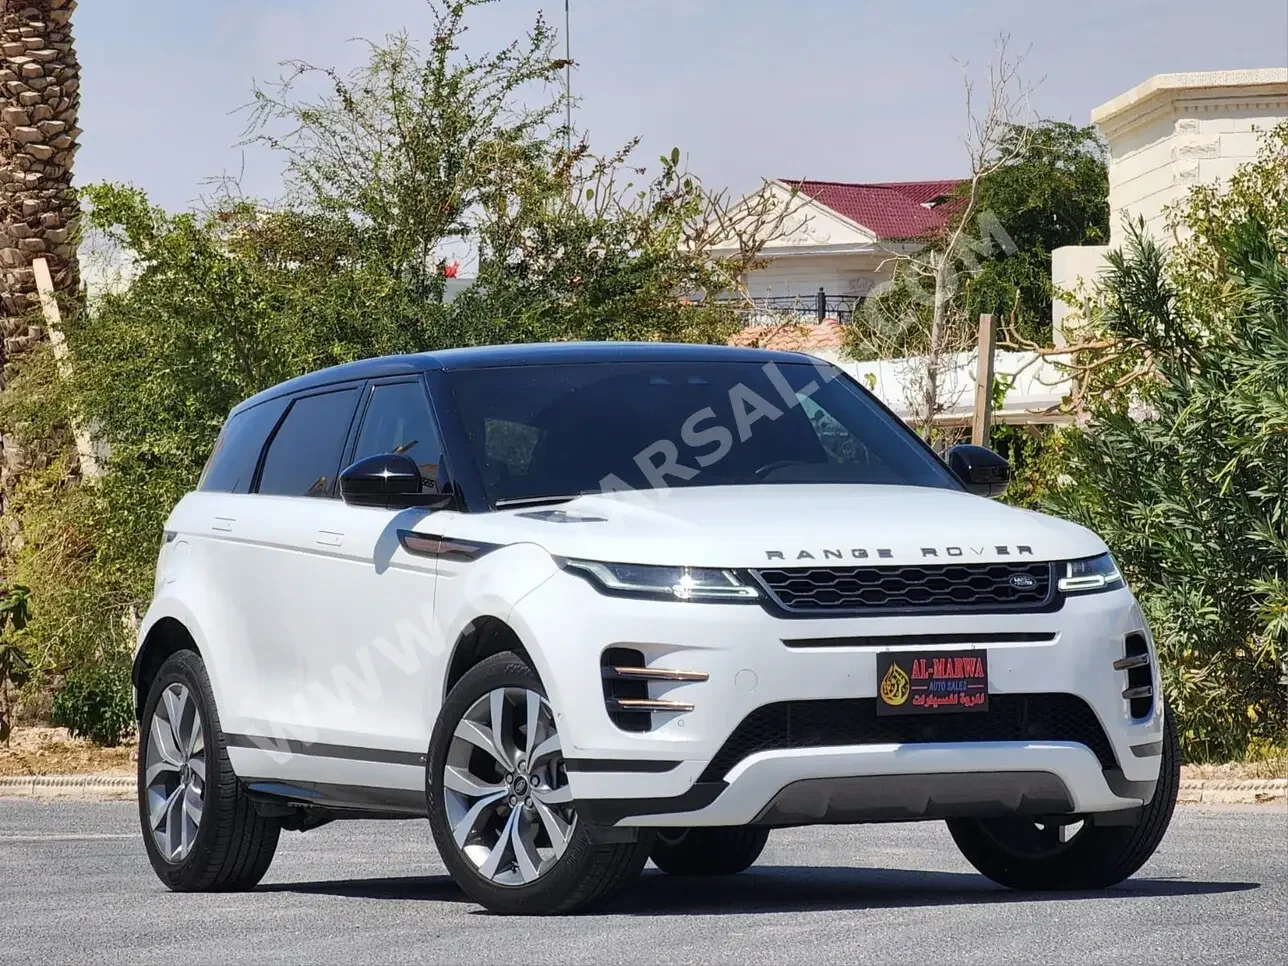 Land Rover  Evoque  2020  Automatic  42,000 Km  4 Cylinder  Four Wheel Drive (4WD)  SUV  White  With Warranty